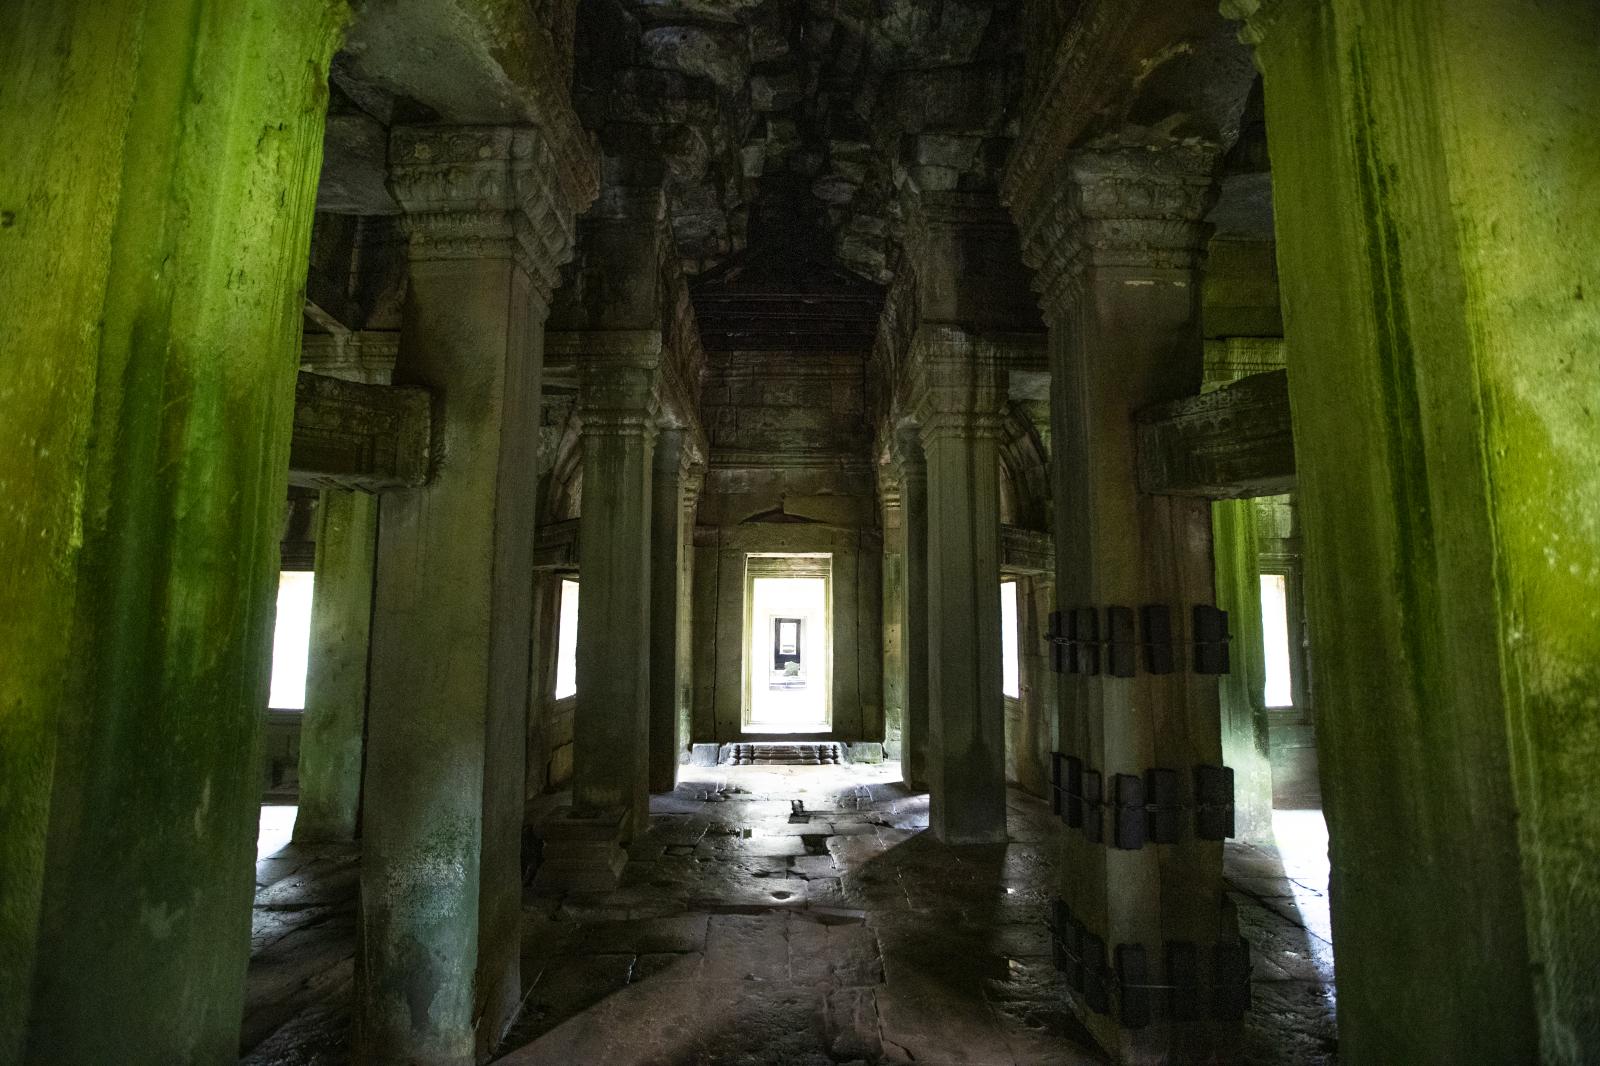 Temple Interior | Buy this image